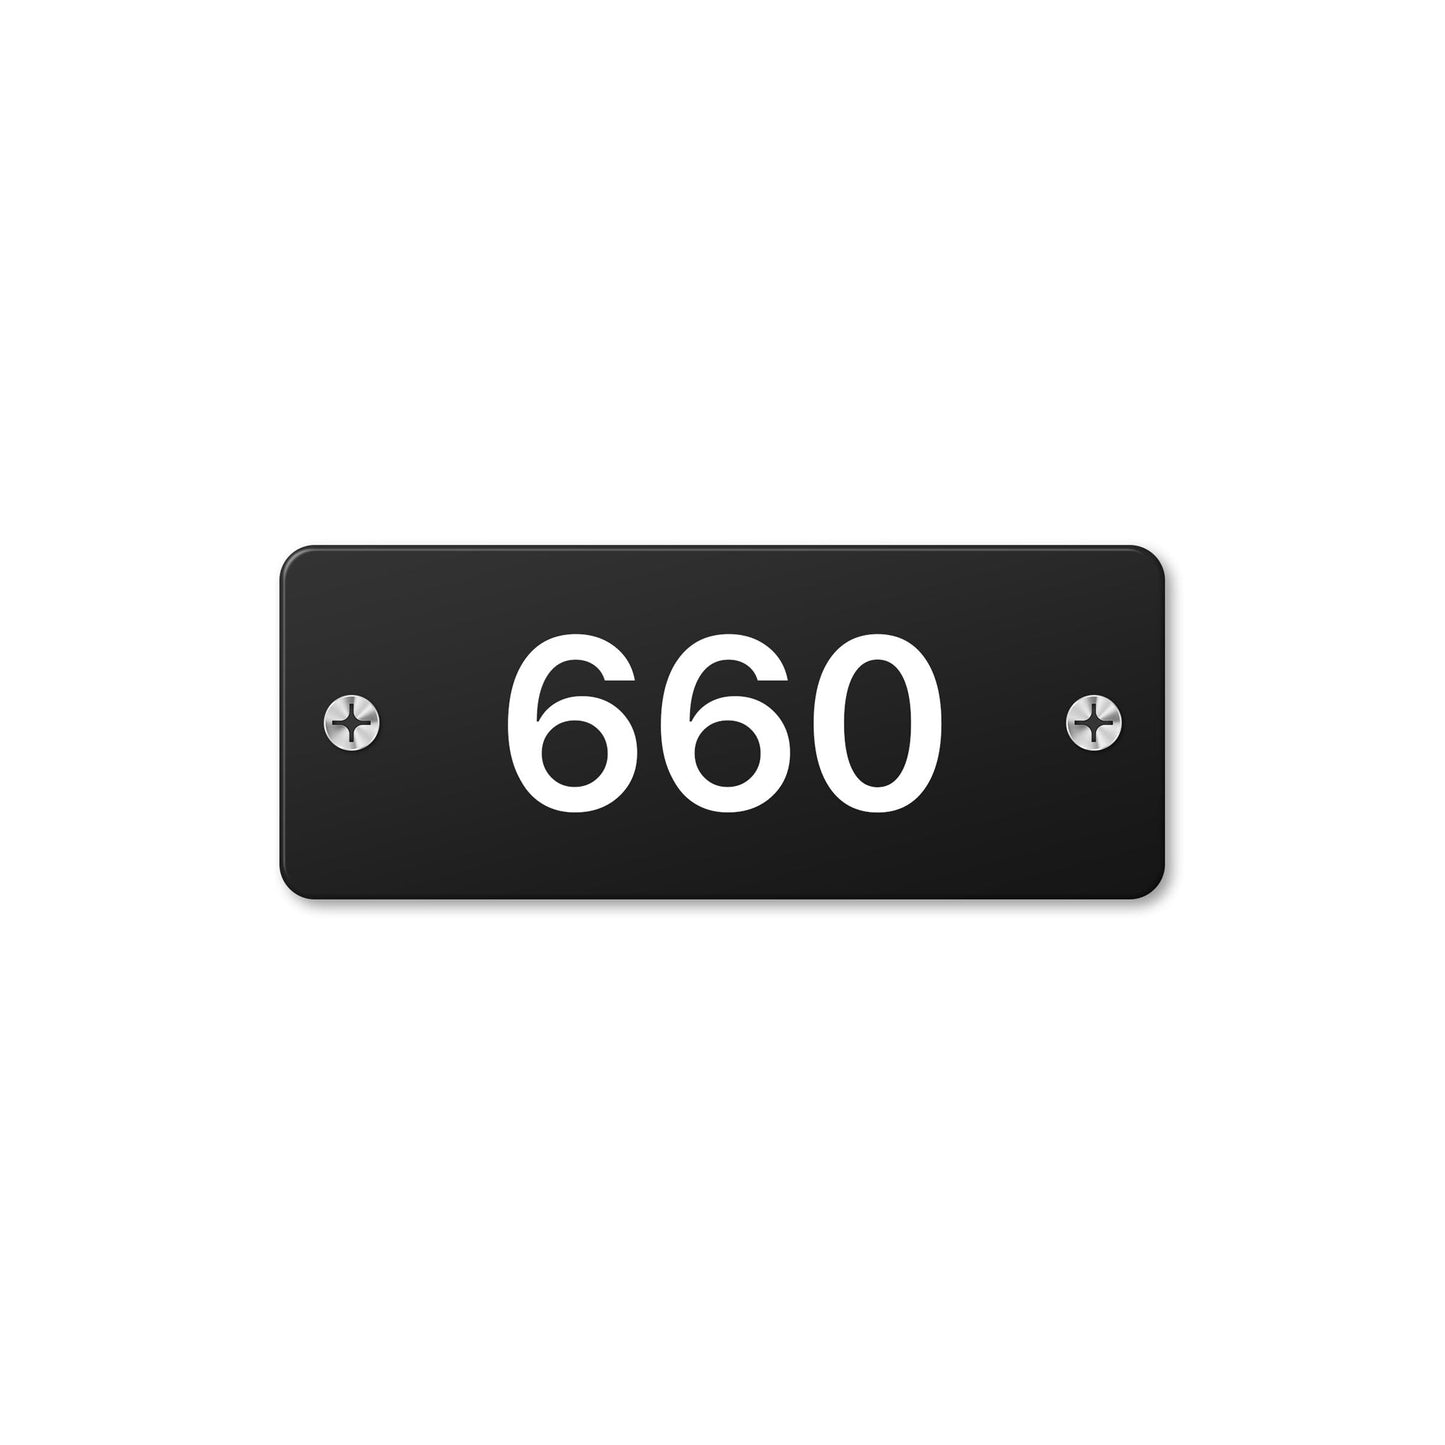 Numeral 660